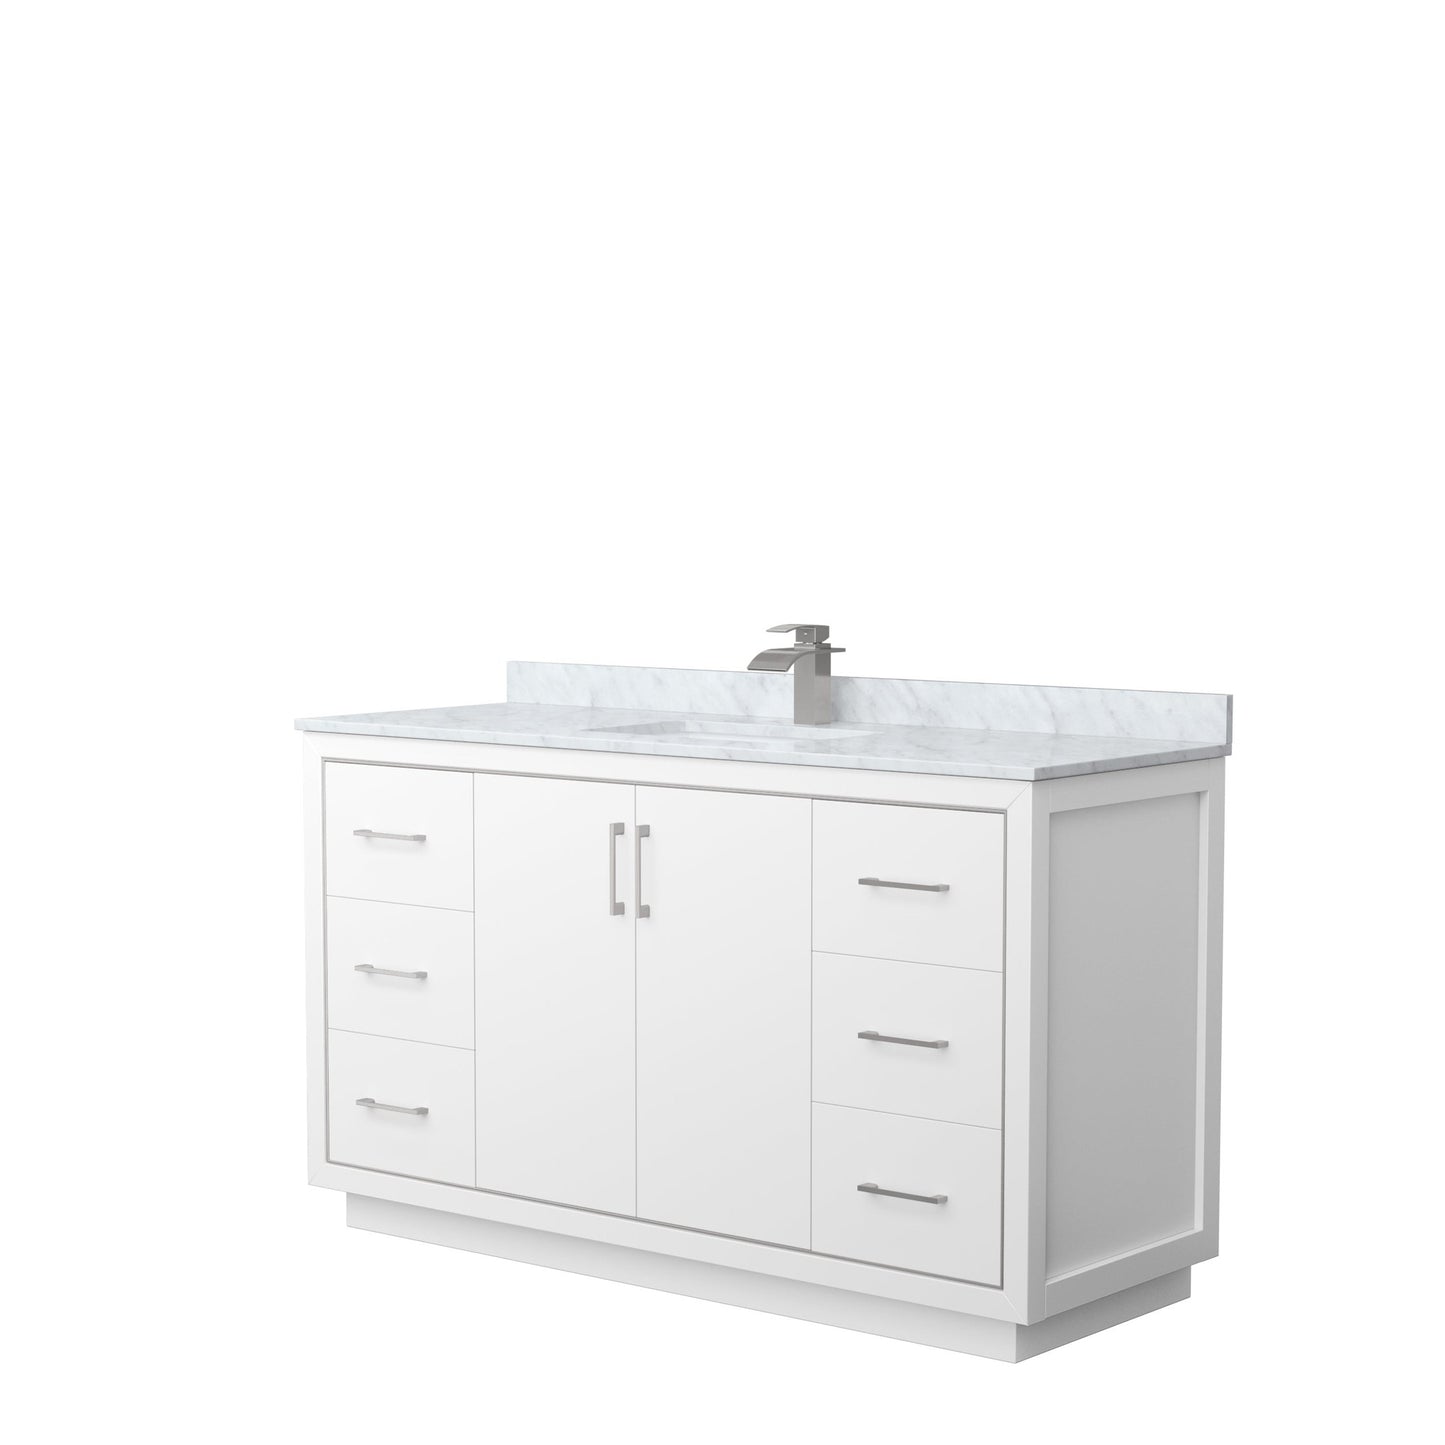 Wyndham Collection Icon 60" Single Bathroom Vanity in White, White Carrara Marble Countertop, Undermount Square Sink, Brushed Nickel Trim